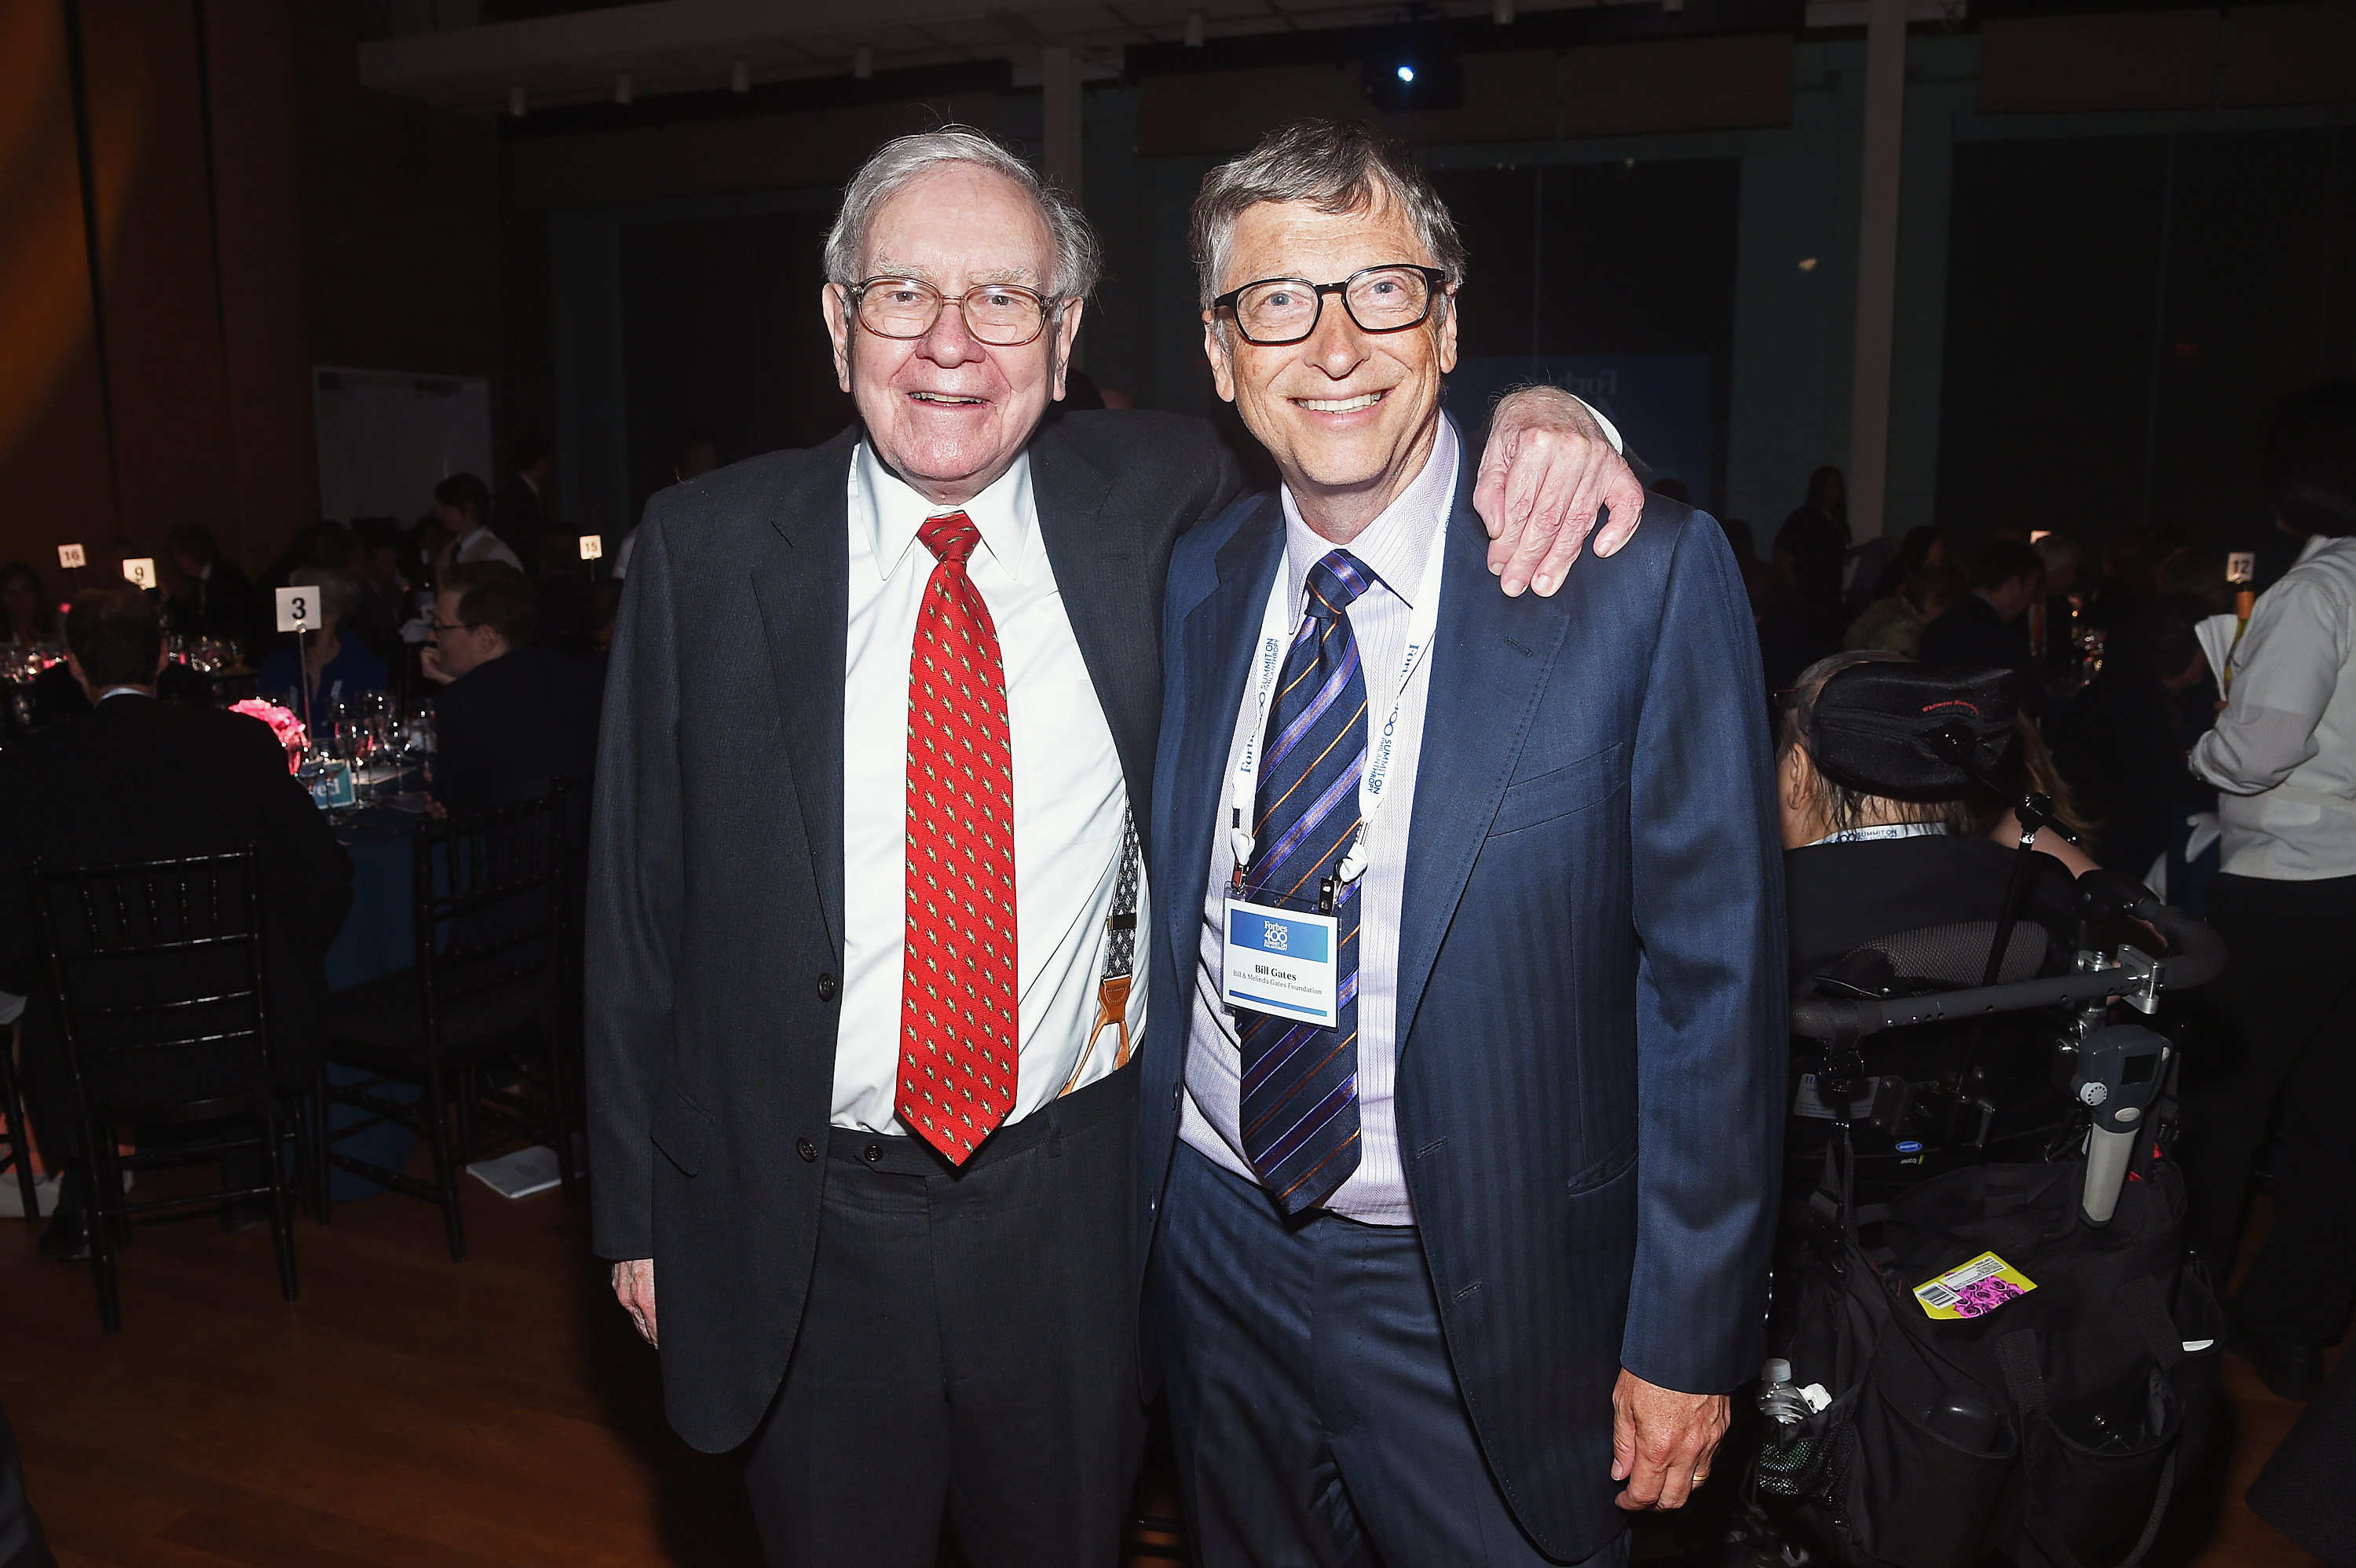 NEW YORK, NY - JUNE 03:  Warren Buffett (L) and Bill Gates attend the Forbes' 2015 Philanthropy Summit Awards Dinner on June 3, 2015 in New York City.  (Photo by Dimitrios Kambouris/Getty Images) (Dimitrios Kambouris—Getty Images)